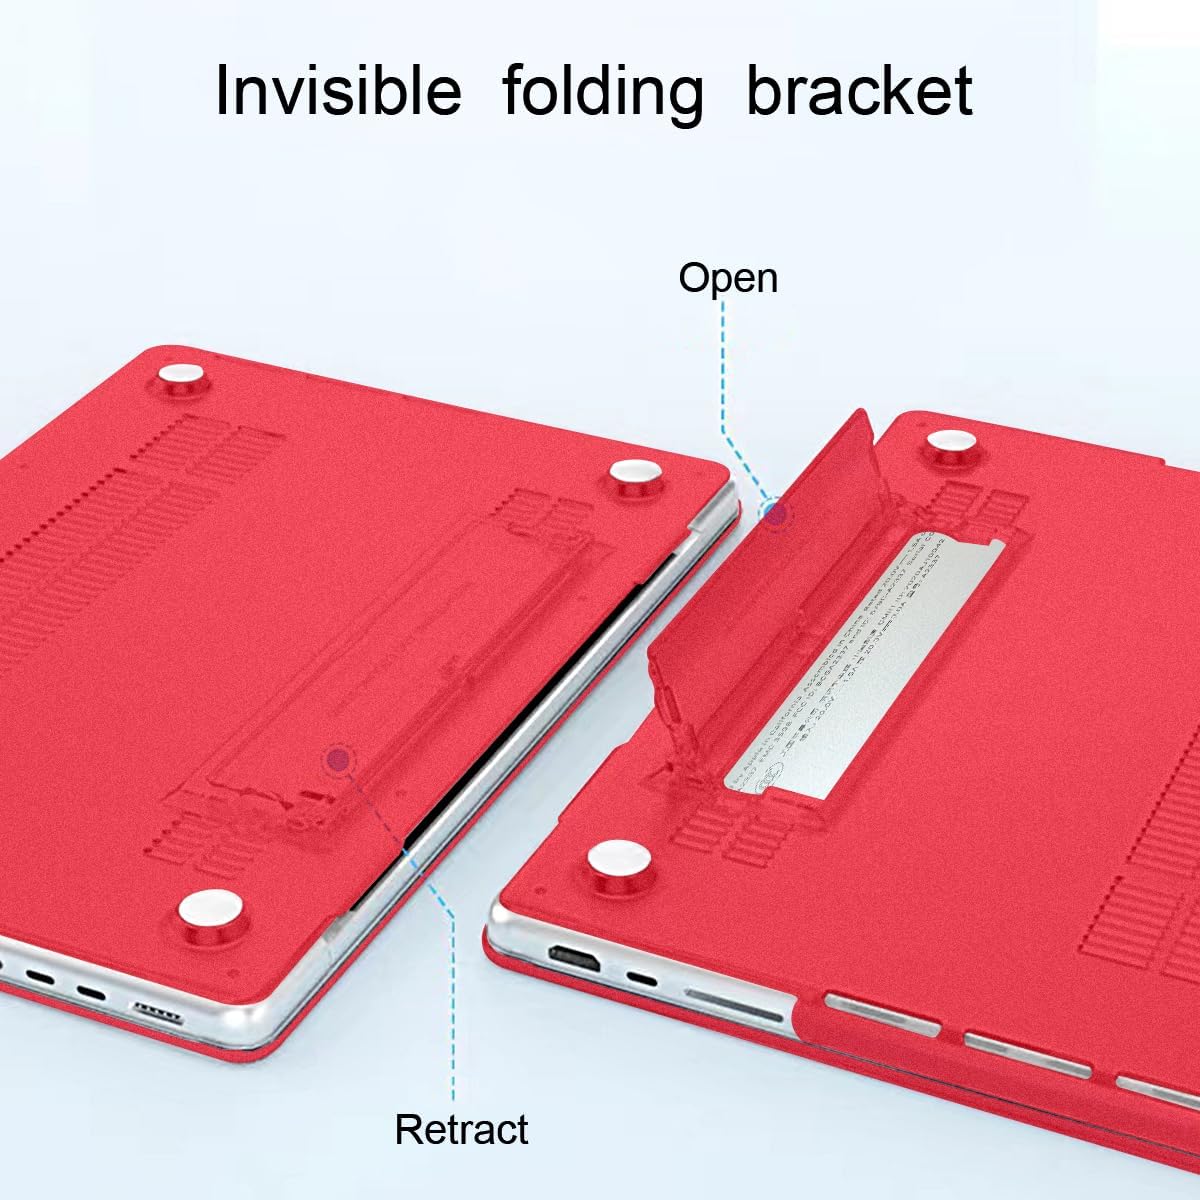 Anti-Fingerprint Case Cover for Macbook Air 13 inch M1 A2337 / A2179 Touch ID 2020-2021 with Folding Stand (Red)